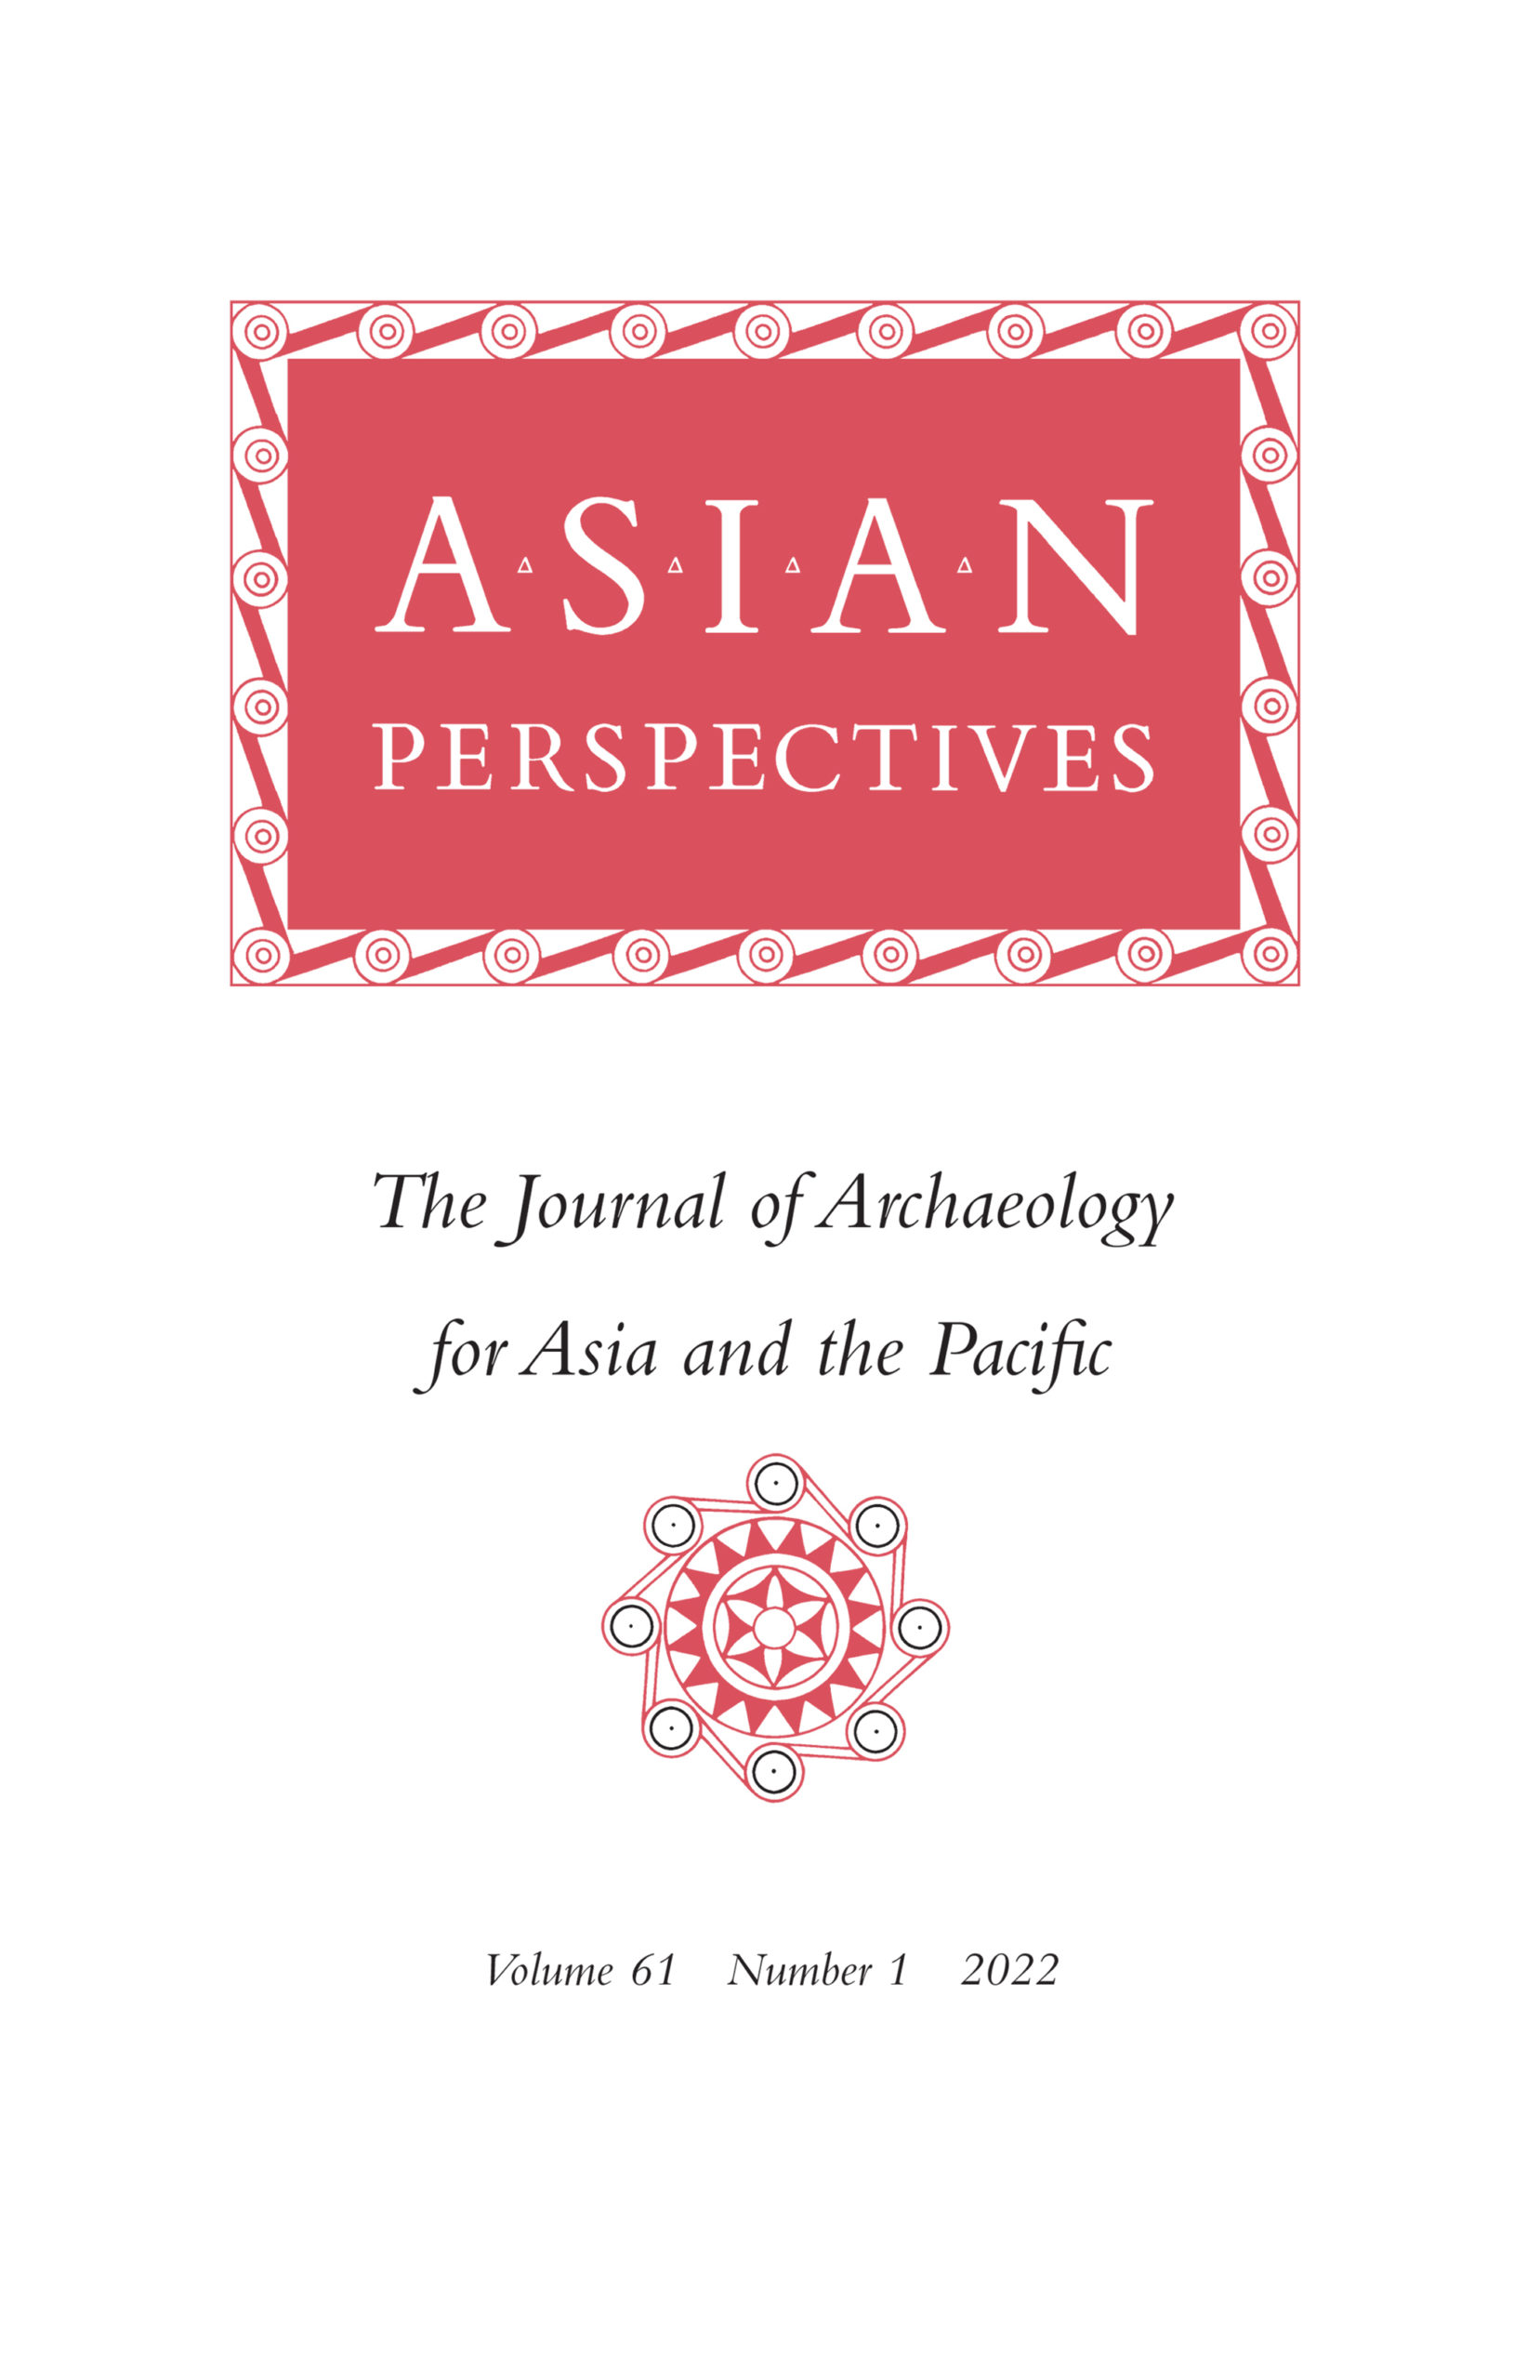 Asian Perspectives: The Journal of Archaeology for Asia and the Pacific